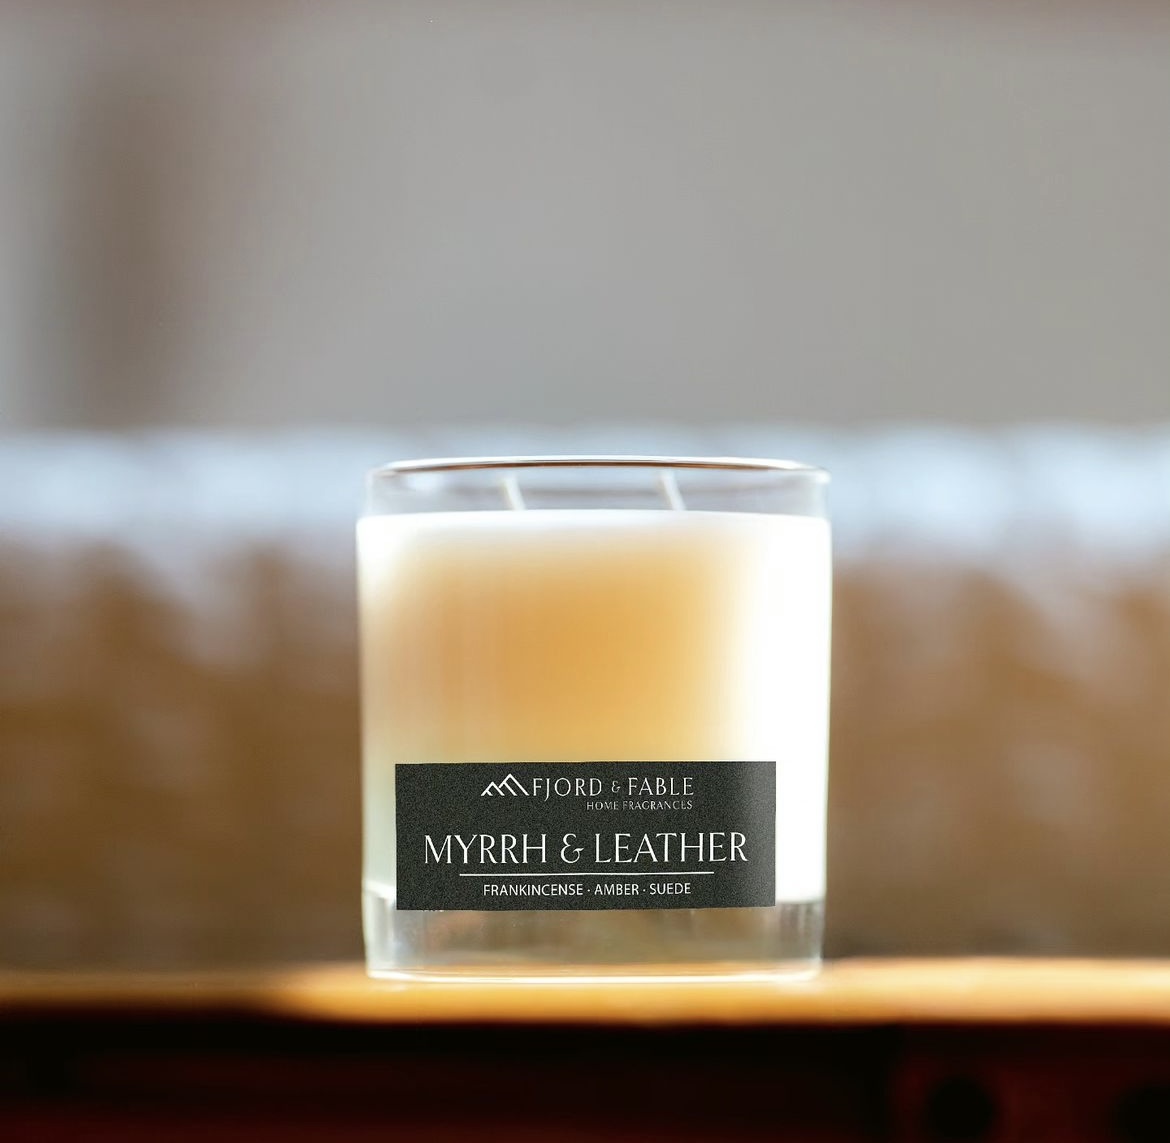 A photo of the Myrrh & Leather candle from Fjord and Fable. The scent smells like frankincense, amber, and suede.